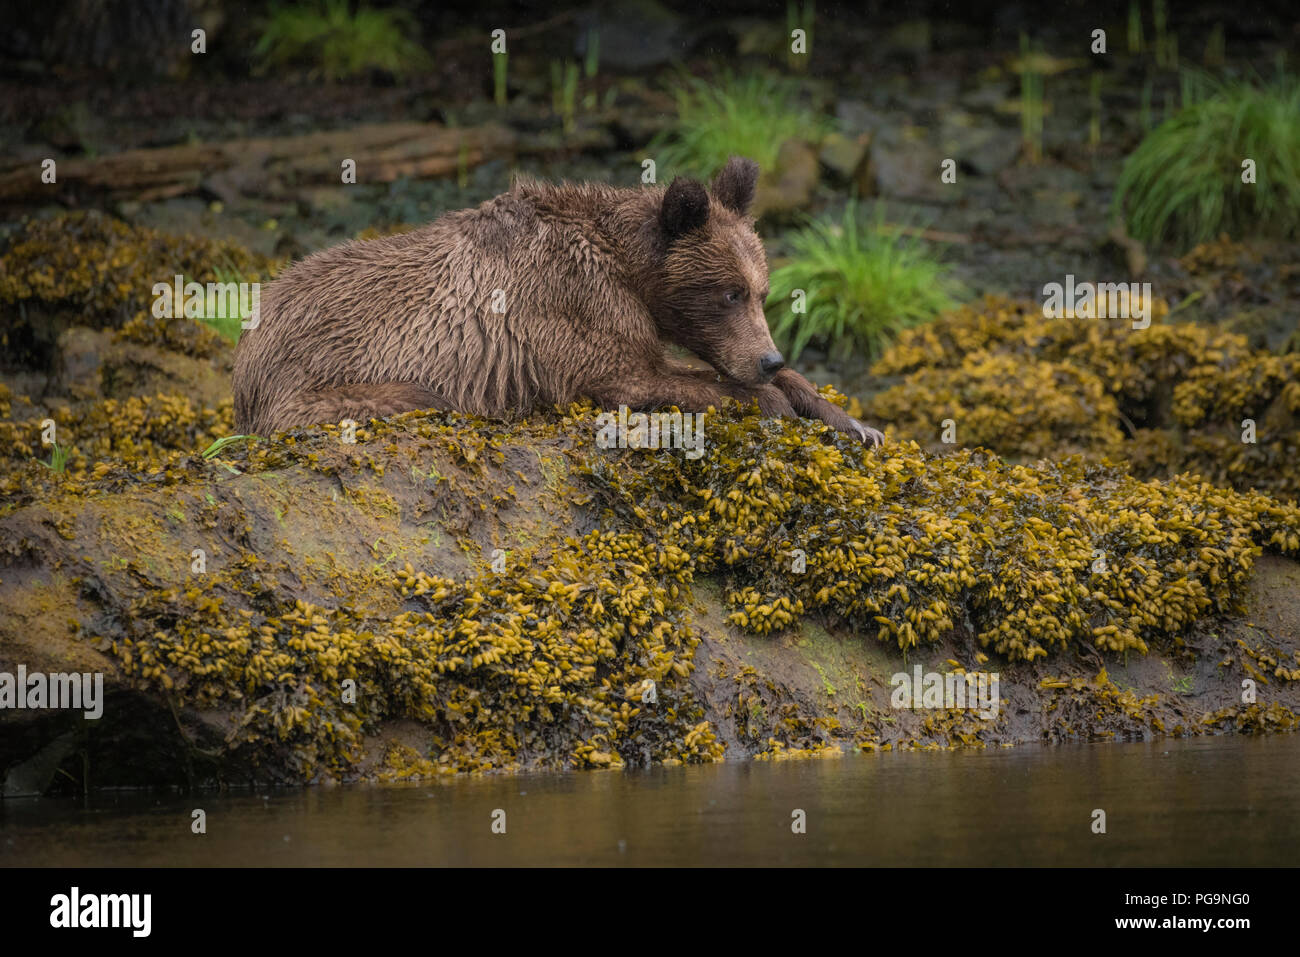 A young grizzly bear (Ursus arctos) rests on the banks of the Khutzeymateen Inlet at low tide, British Columbia, Canada Stock Photo